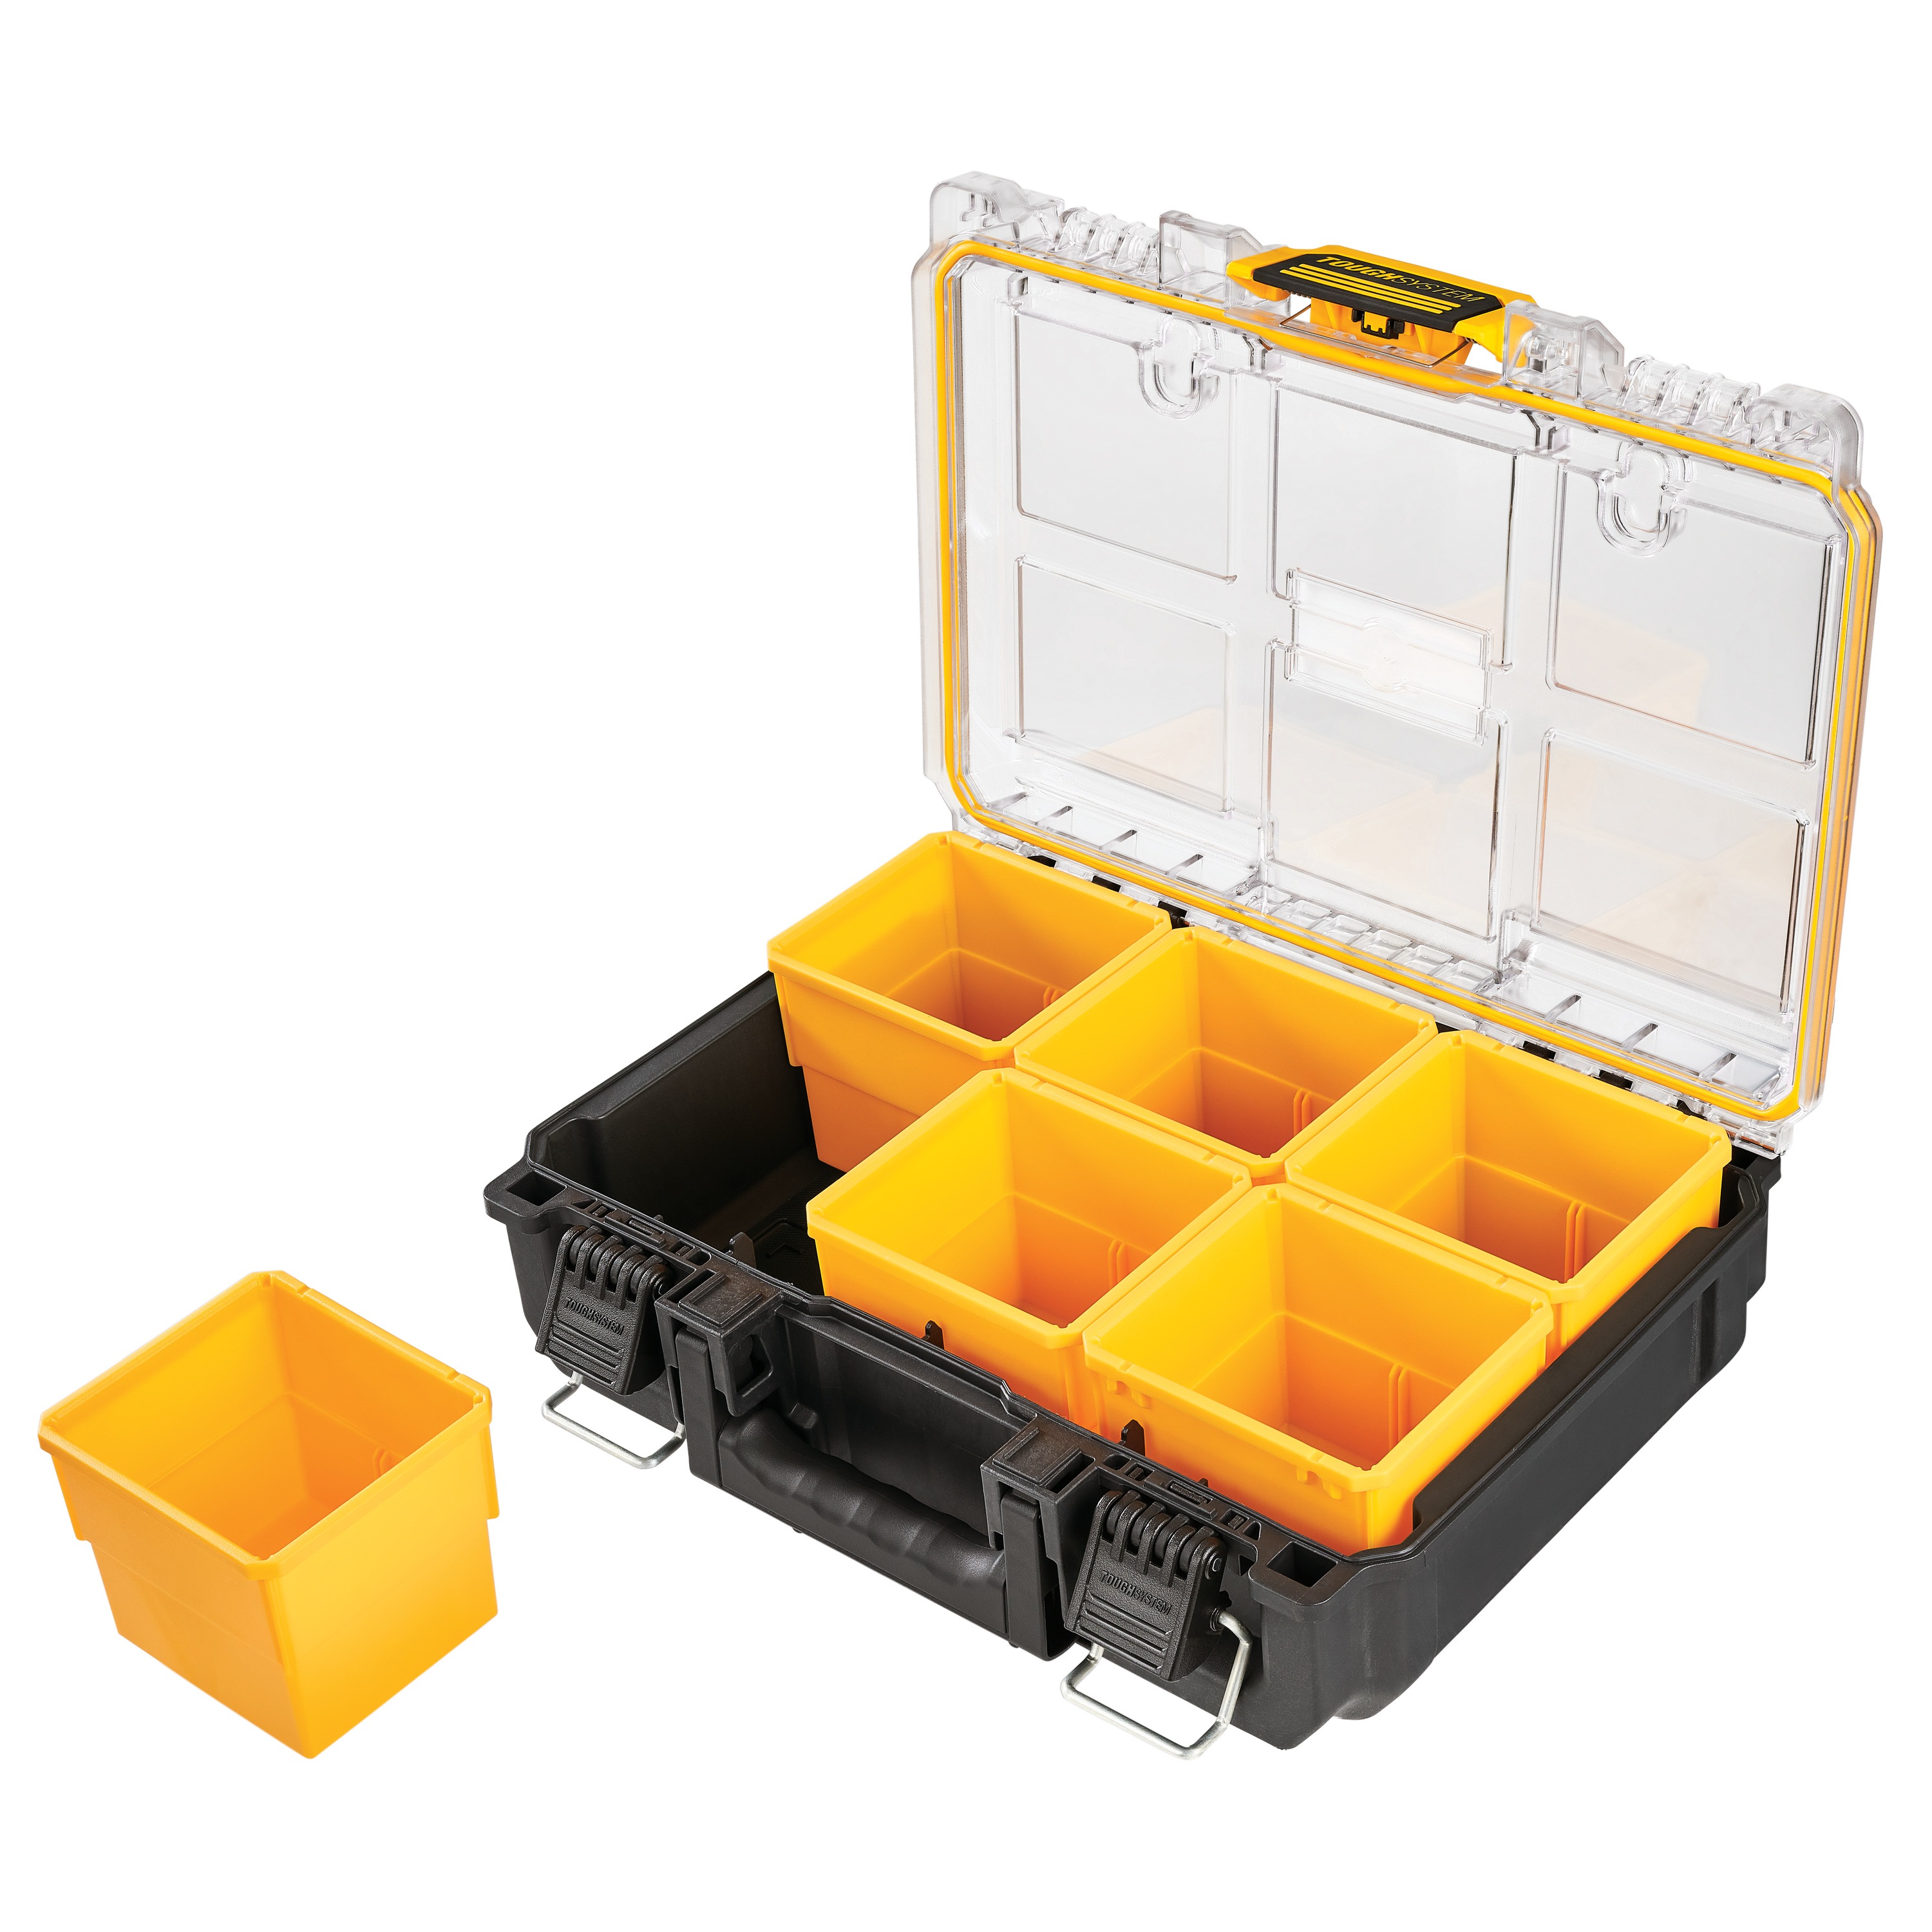 Removable deep cup feature of a tough system 2.0 deep compact organizer.